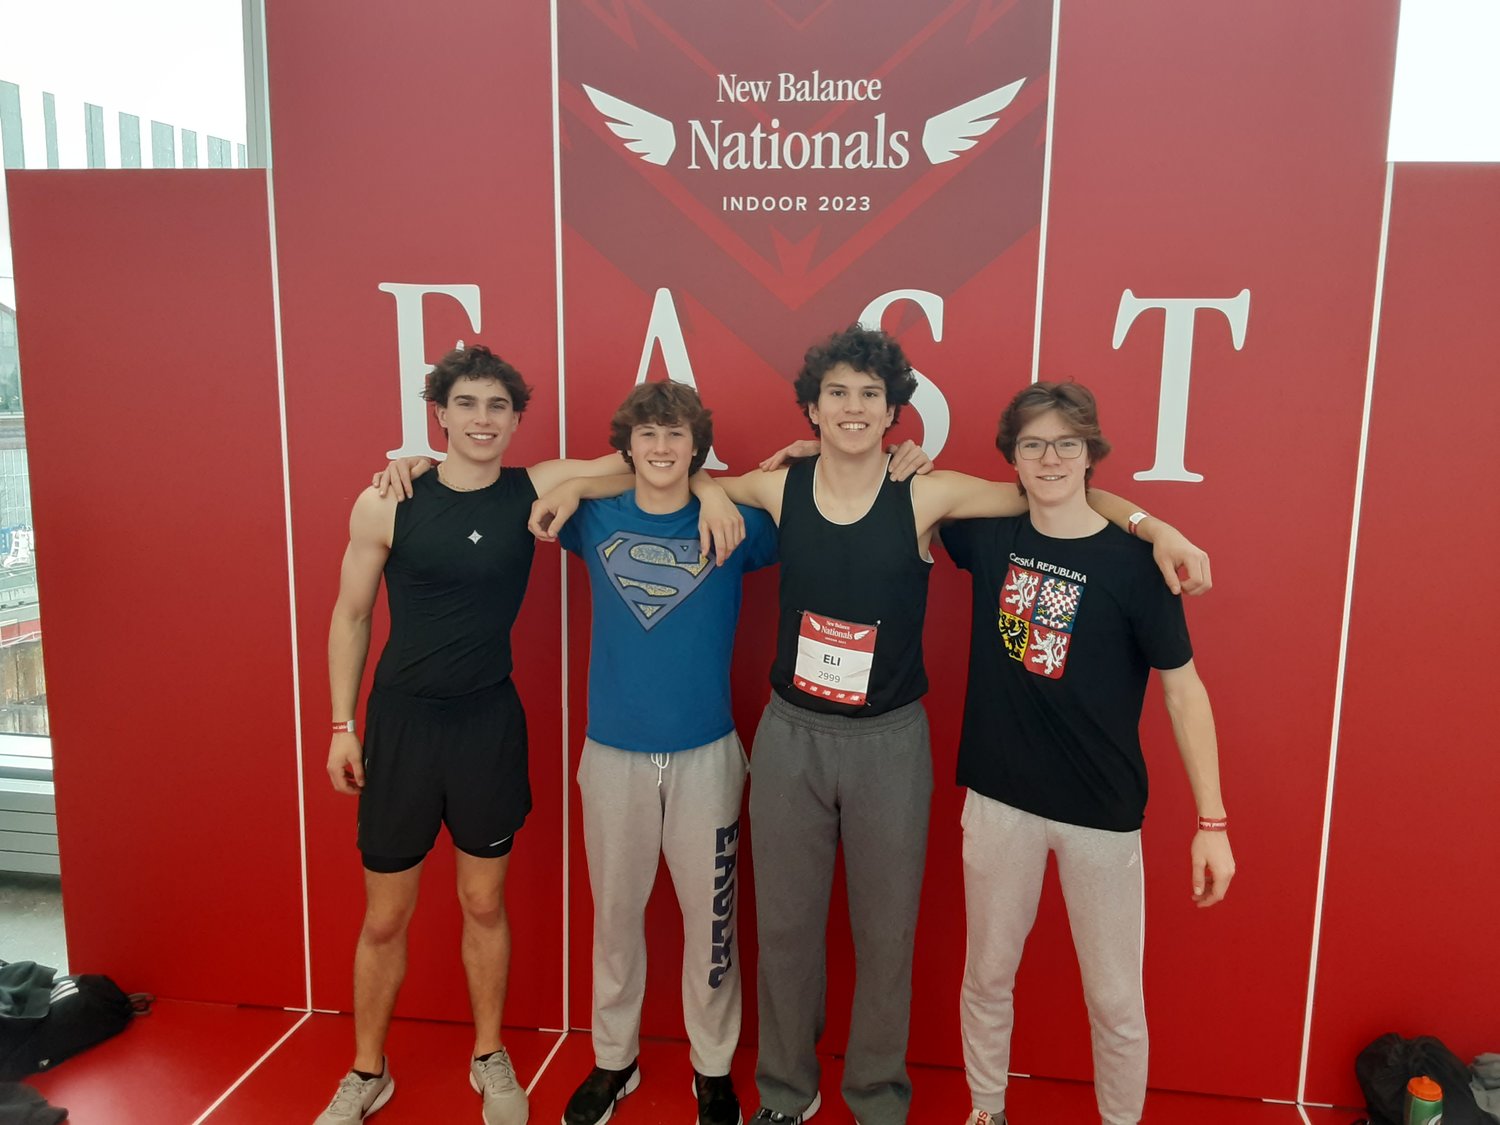 Barrington High School’s shuttle hurdle relay team of Ethan Knight, Ryan Martin, Eli Terrell and Bobby Wind finished 13th at the New Balance Nationals Indoor in Boston earlier this month.